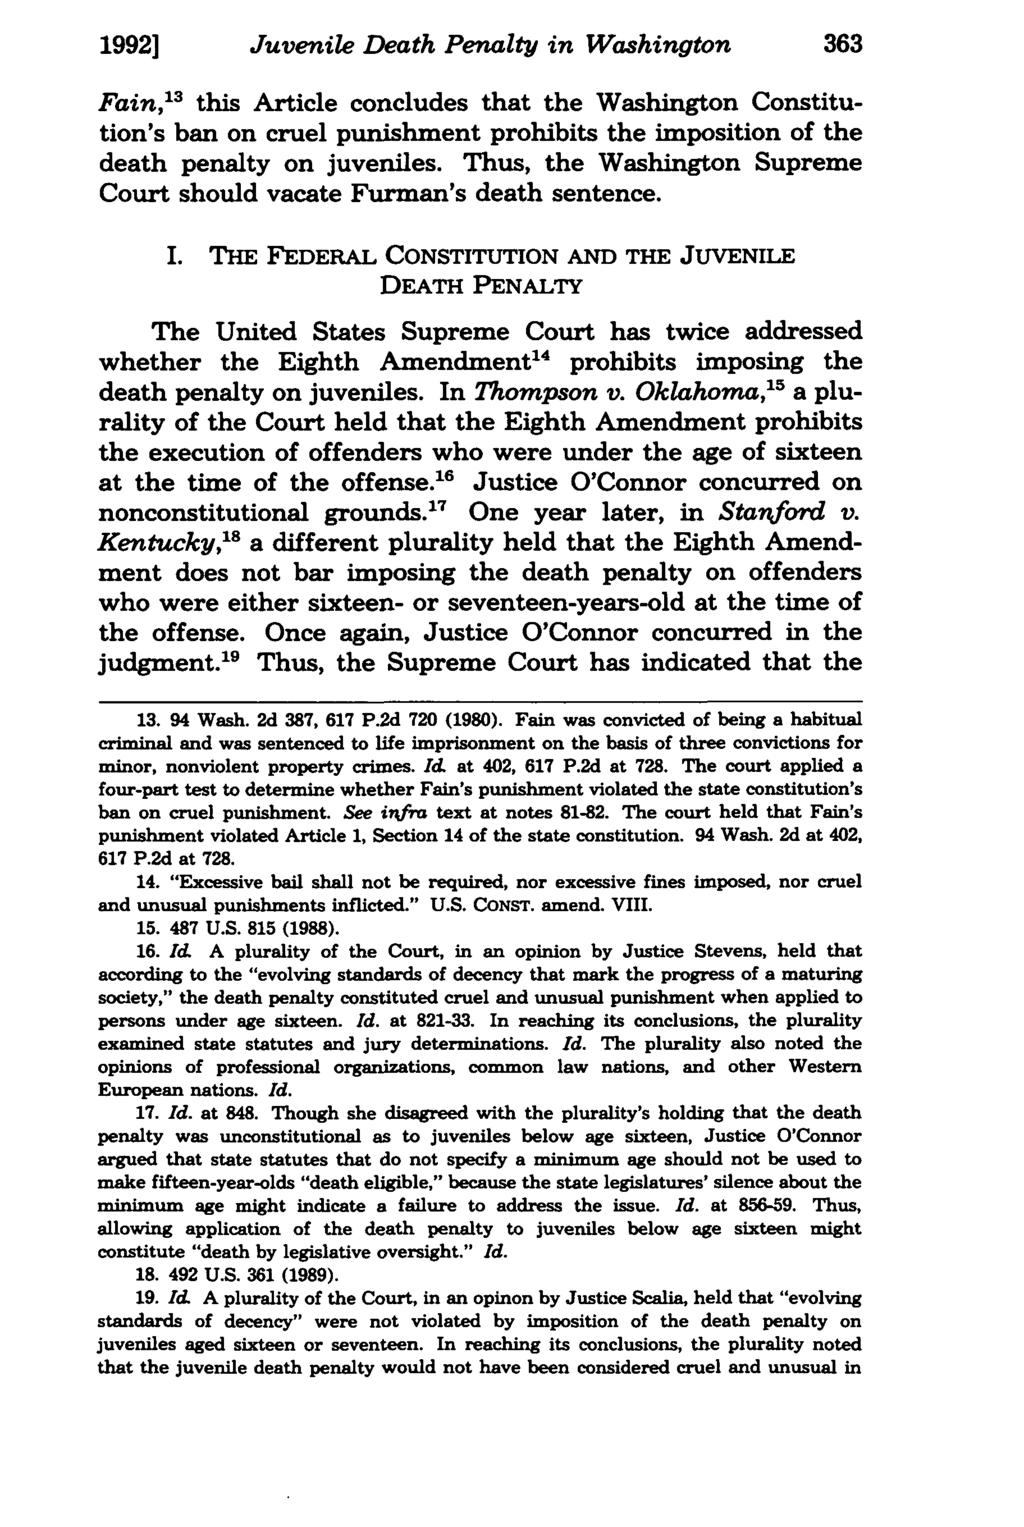 1992] Juvenile Death Penalty in Washington Fain, 3 this Article concludes that the Washington Constitution's ban on cruel punishment prohibits the imposition of the death penalty on juveniles.